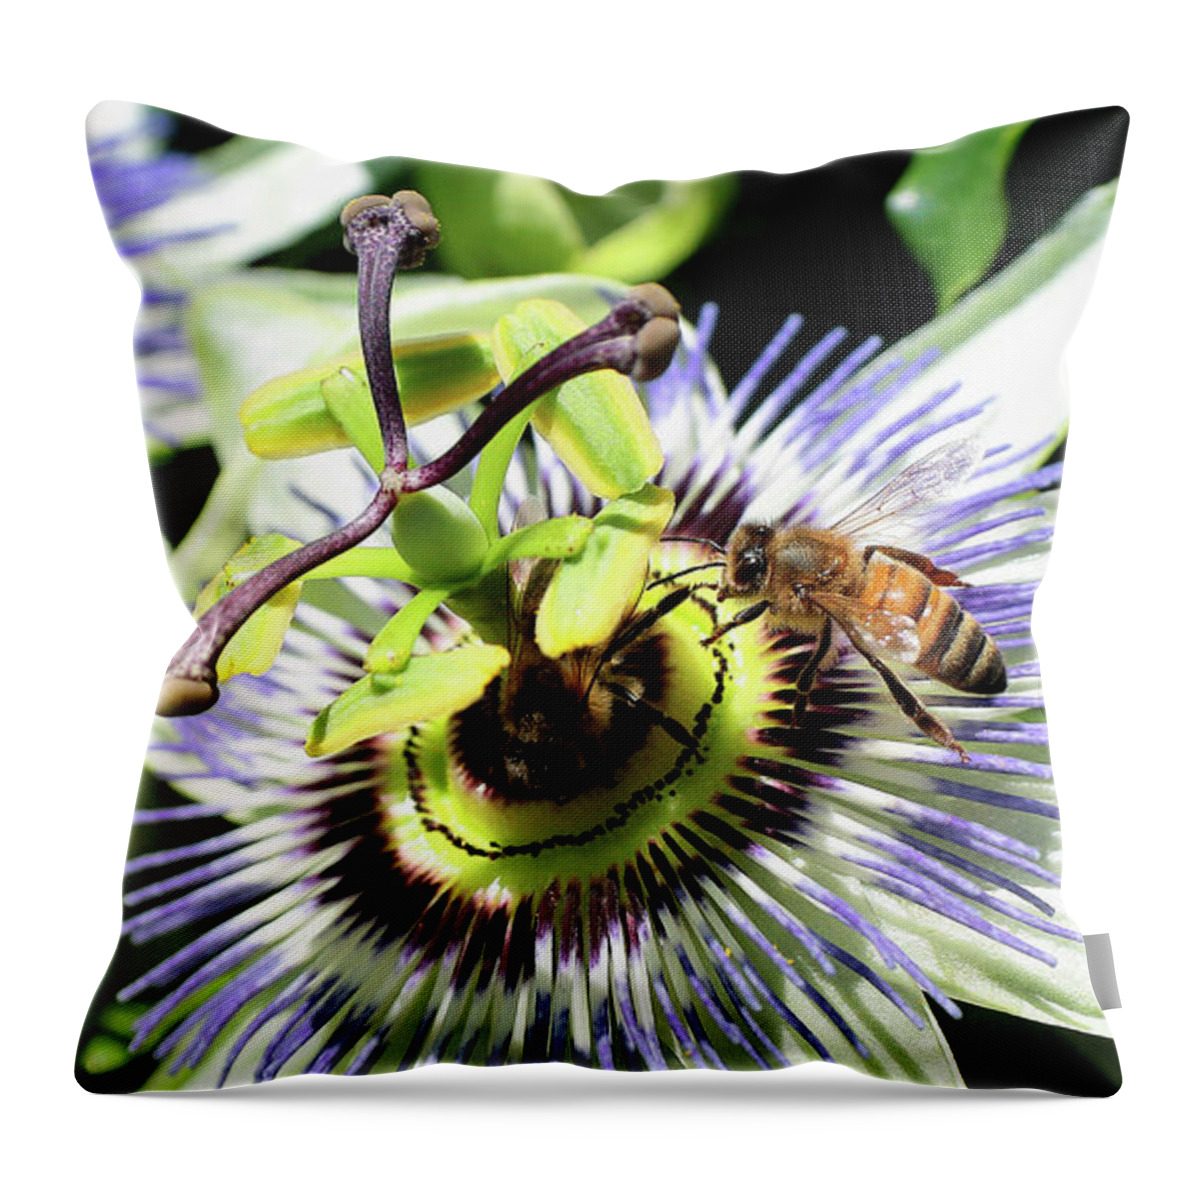 Wild Passion Flower Throw Pillow featuring the digital art Wild passion flower 001 by Kevin Chippindall